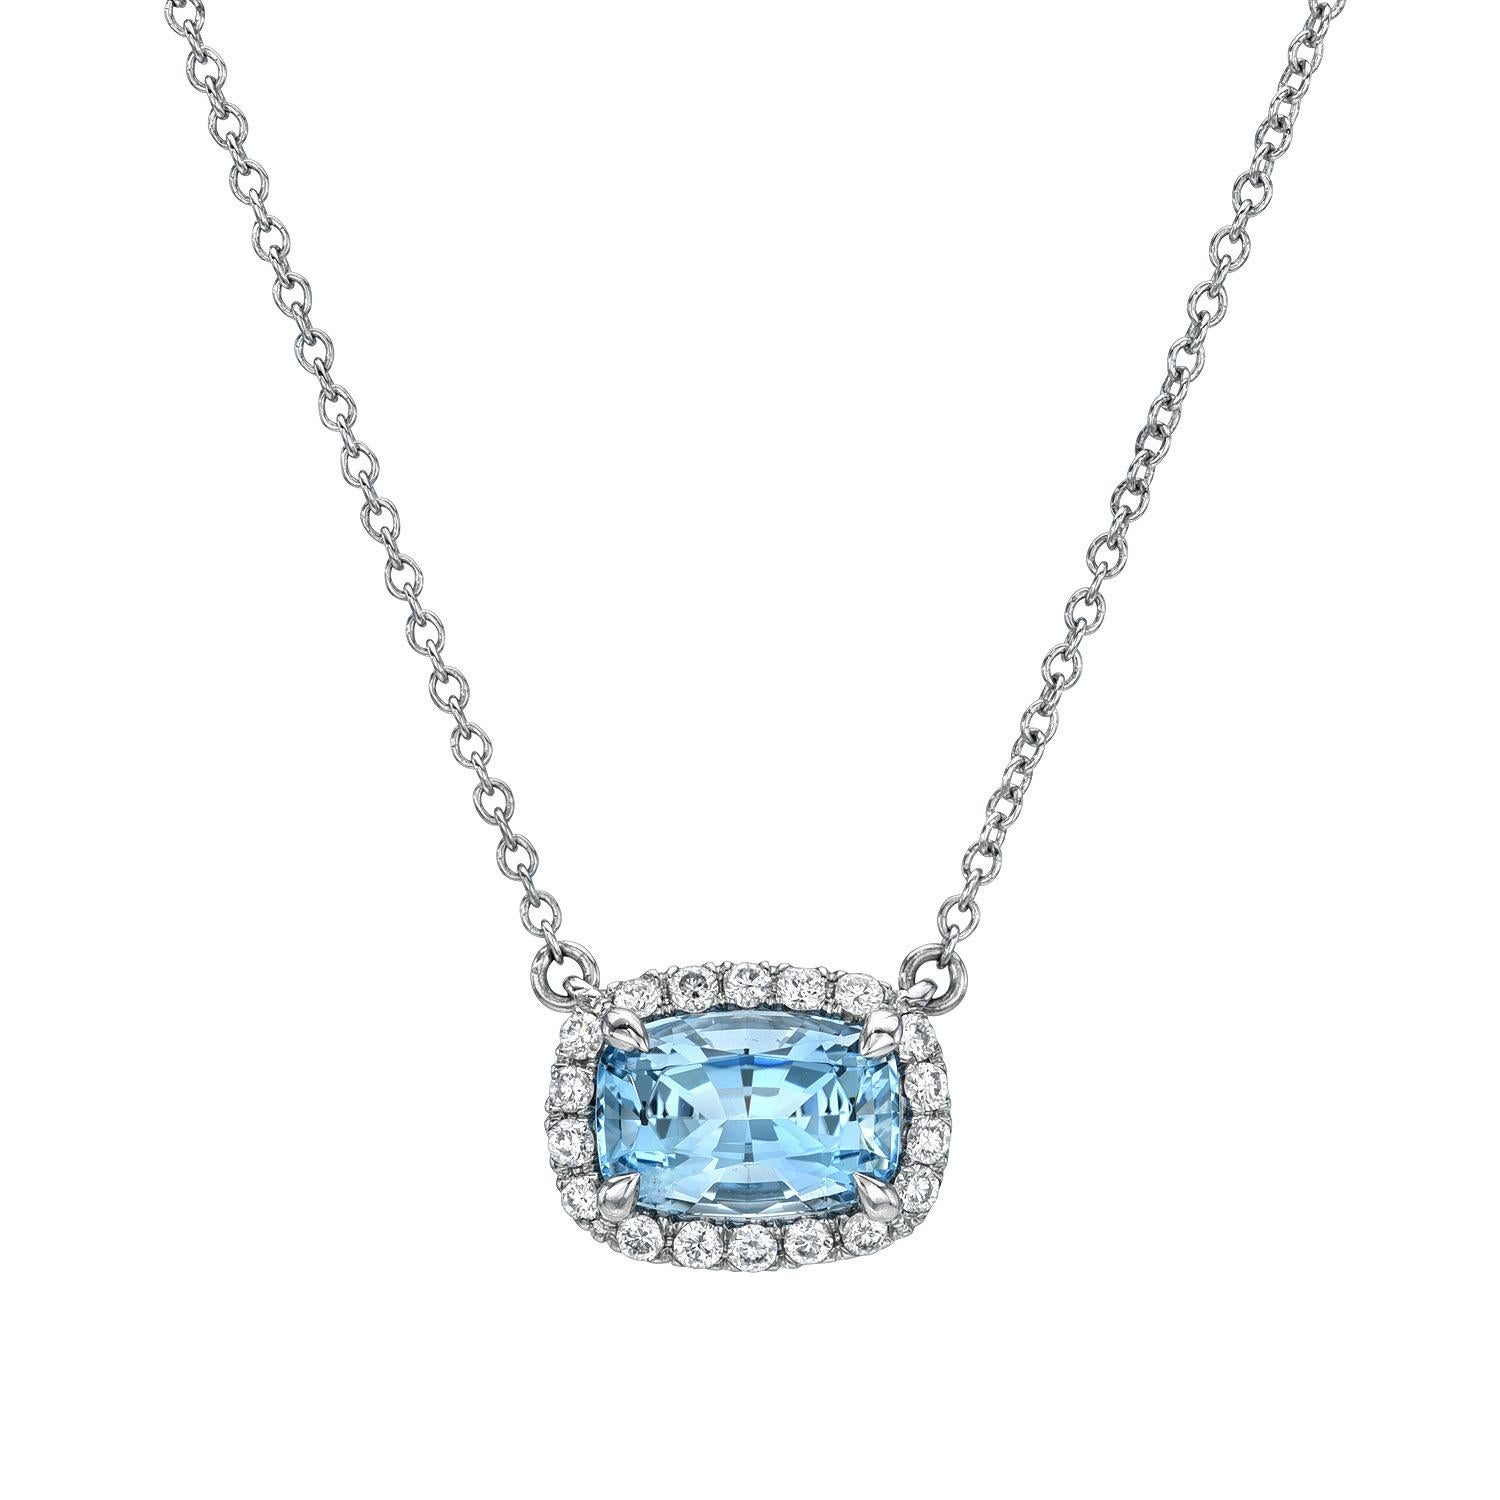 Classic 14K white gold necklace set with a 1.27 carat Aquamarine cushion and a cluster of round brilliant diamonds weighing a total 0.16 carats.

Returns are accepted and paid by us within 7 days of delivery.

Please FOLLOW the MERKABA storefront to